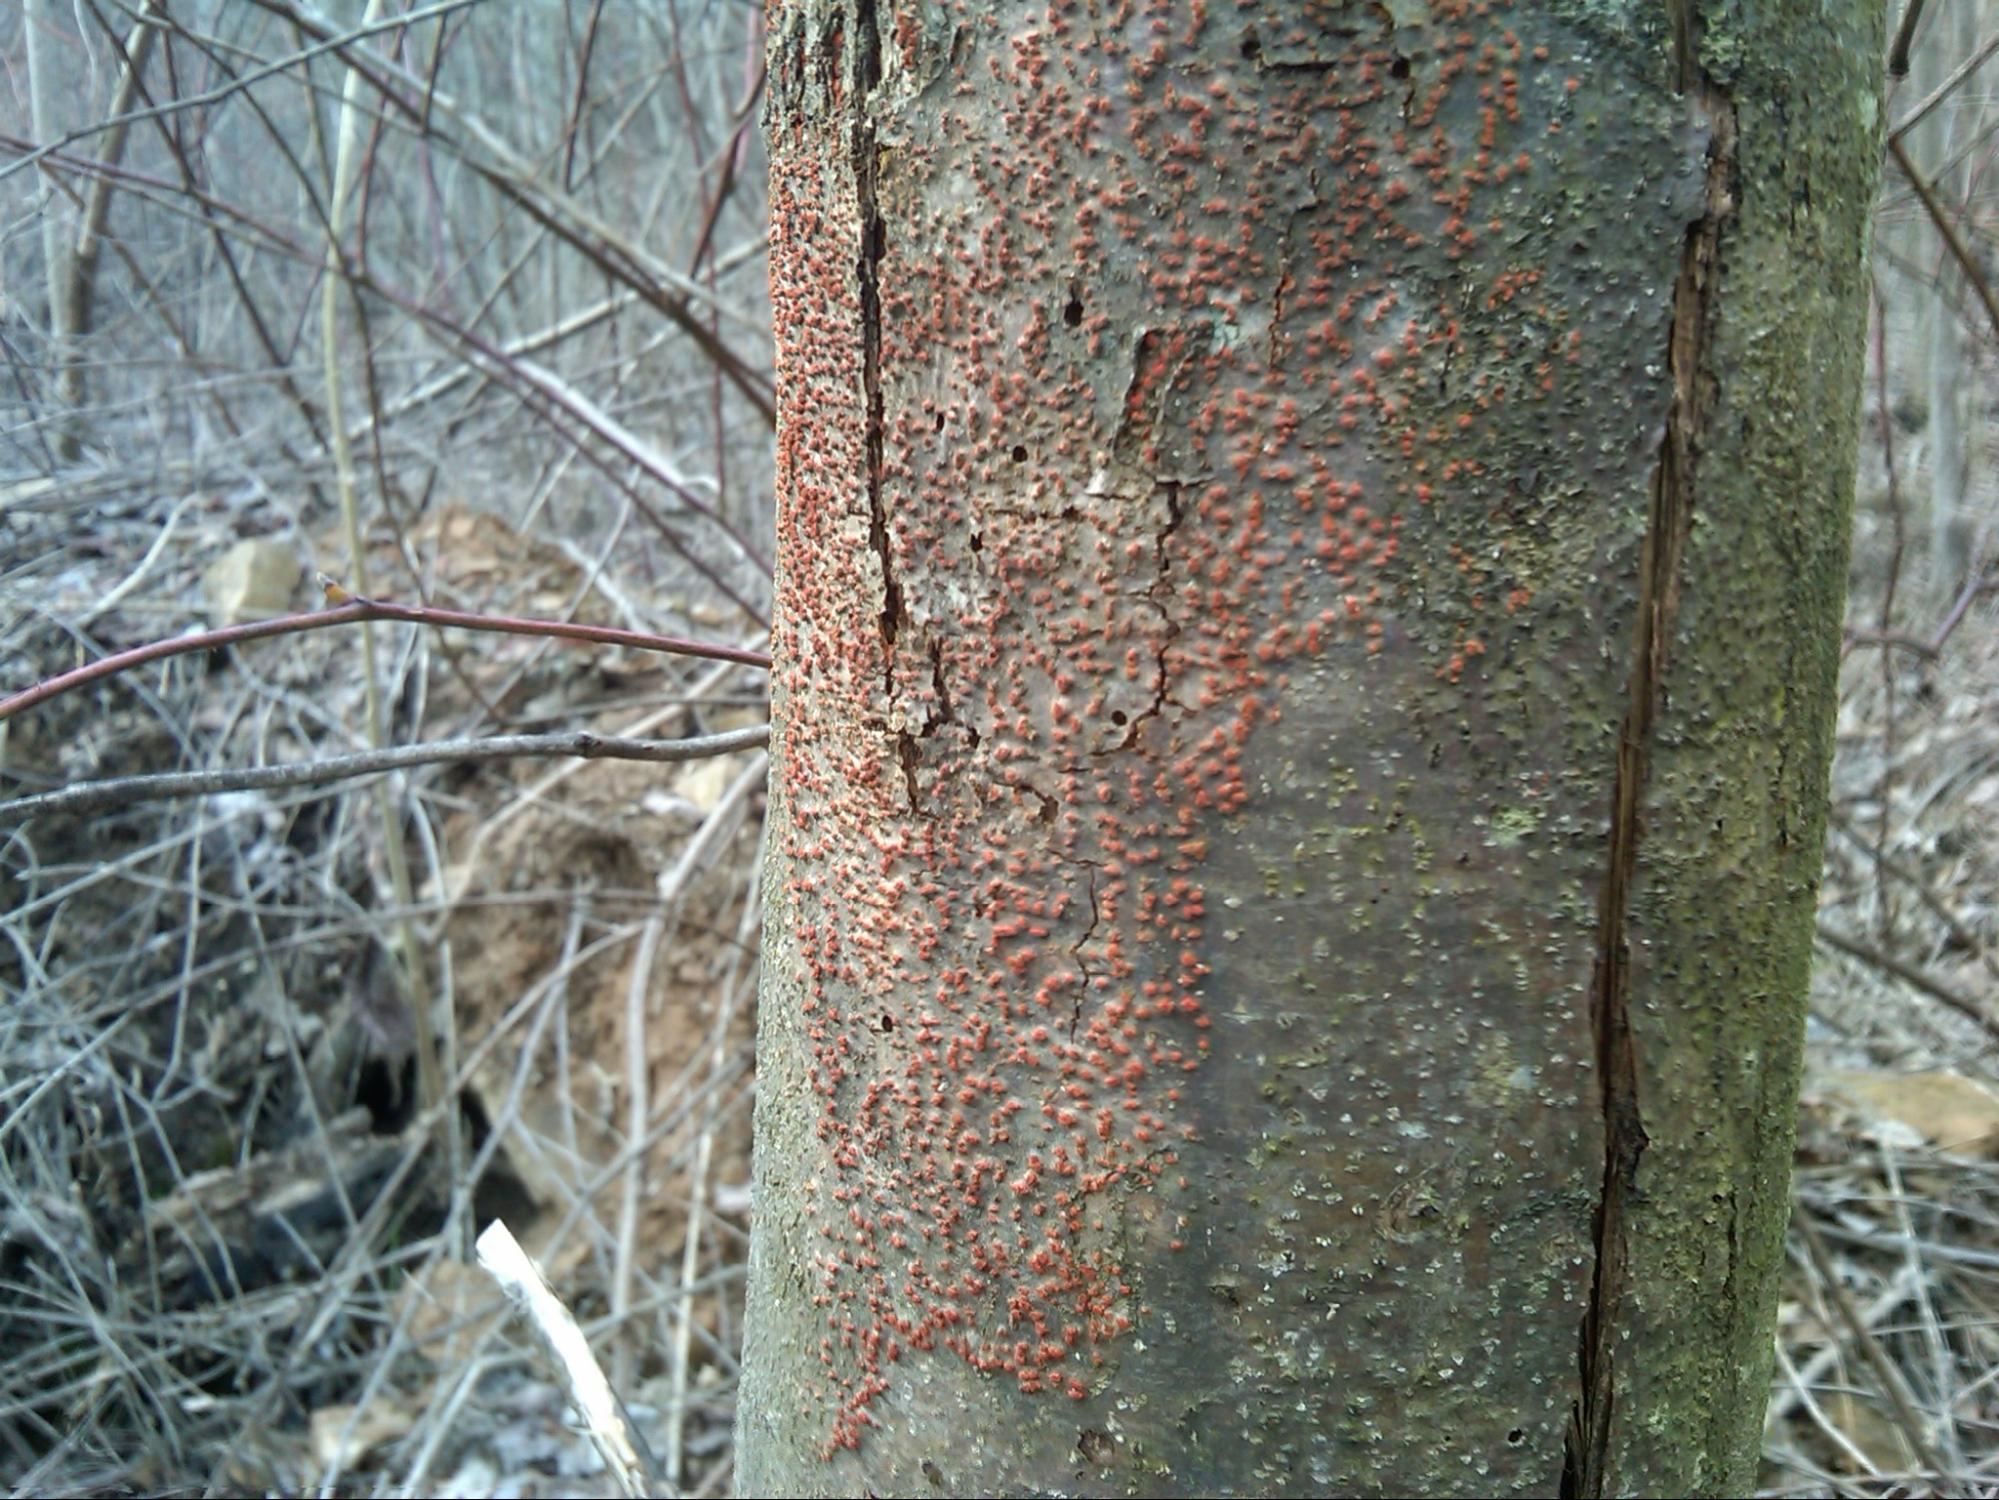 Chestnut tree fungus blight on the bark of a ~10 year old Chestnut tree in Adams County, Ohio Date, 18 February 2012, Claudette Hoffman.